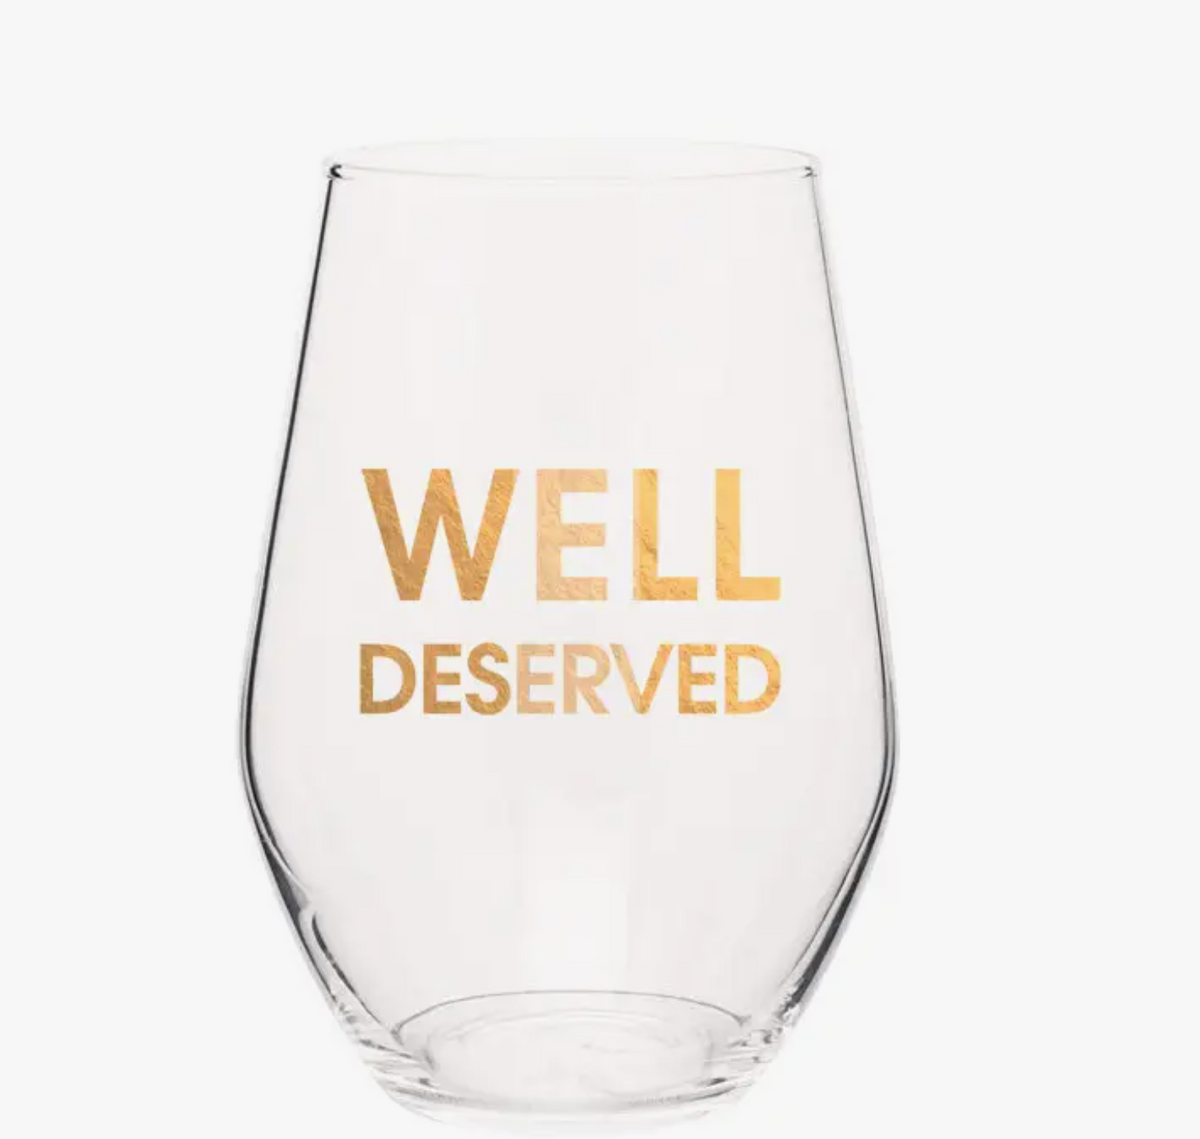 Chez Gagn'e - Well Deserved Stemless Wine Glass